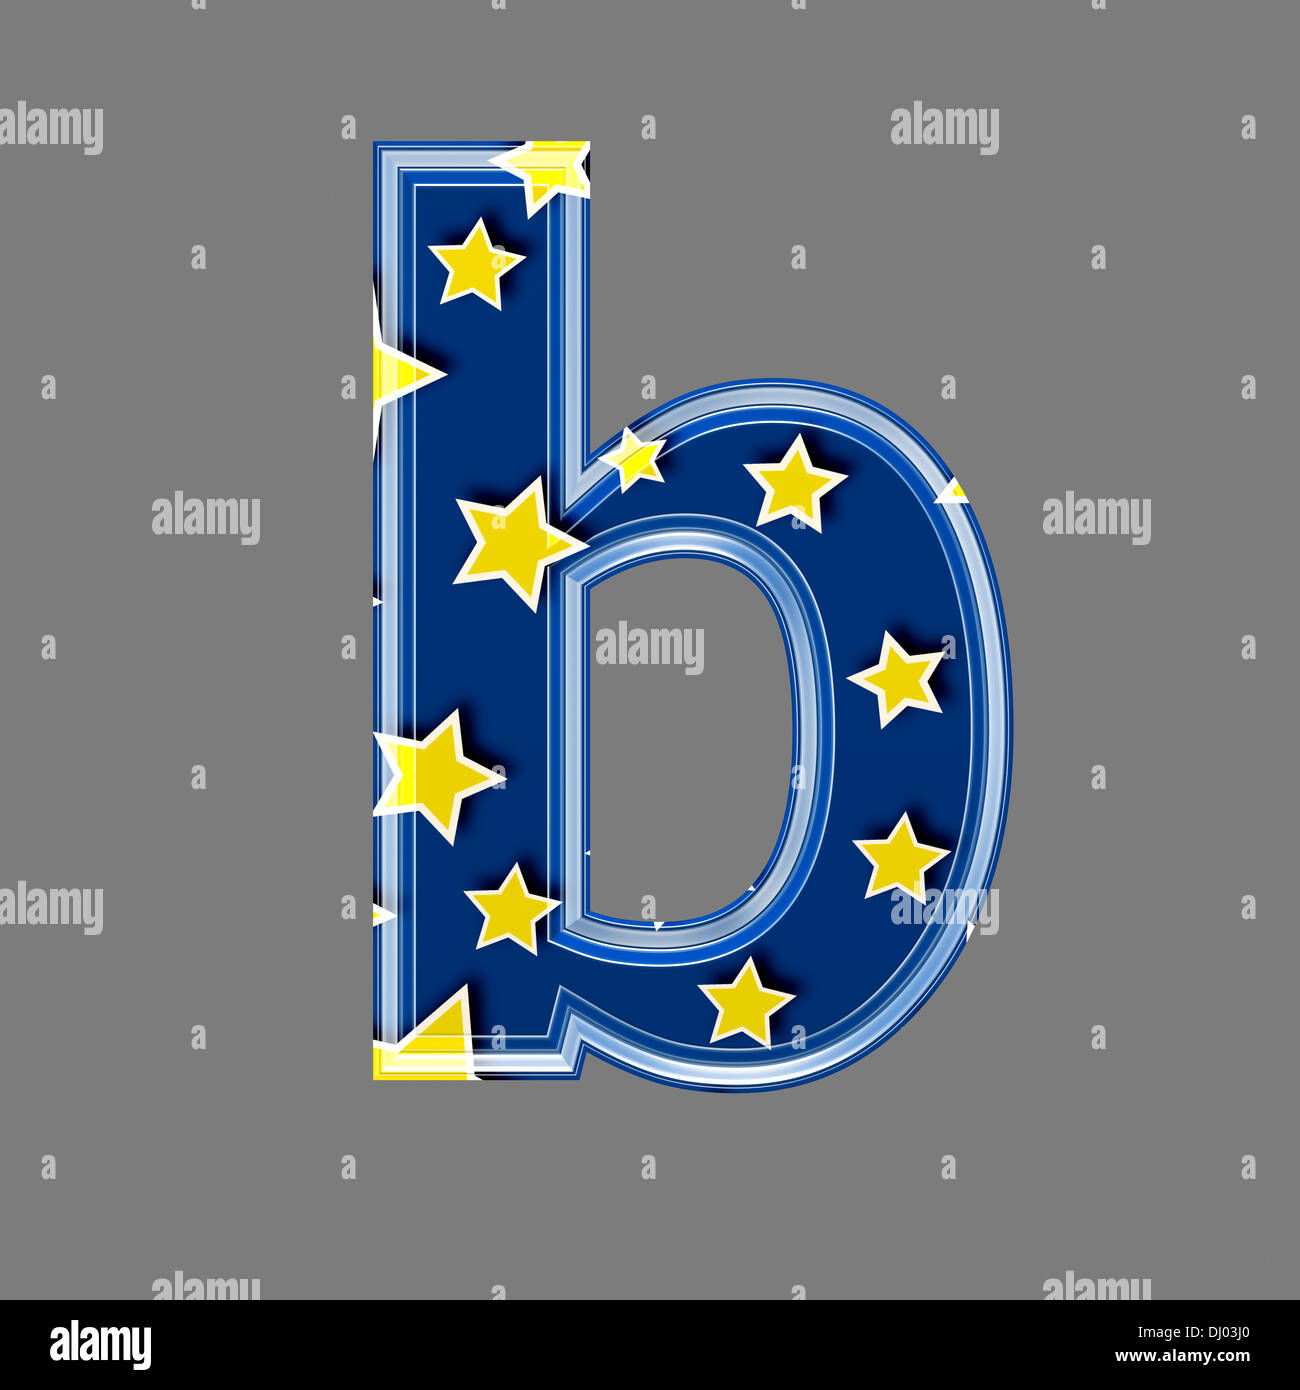 Three dimensional letter with star pattern - b Stock Photo